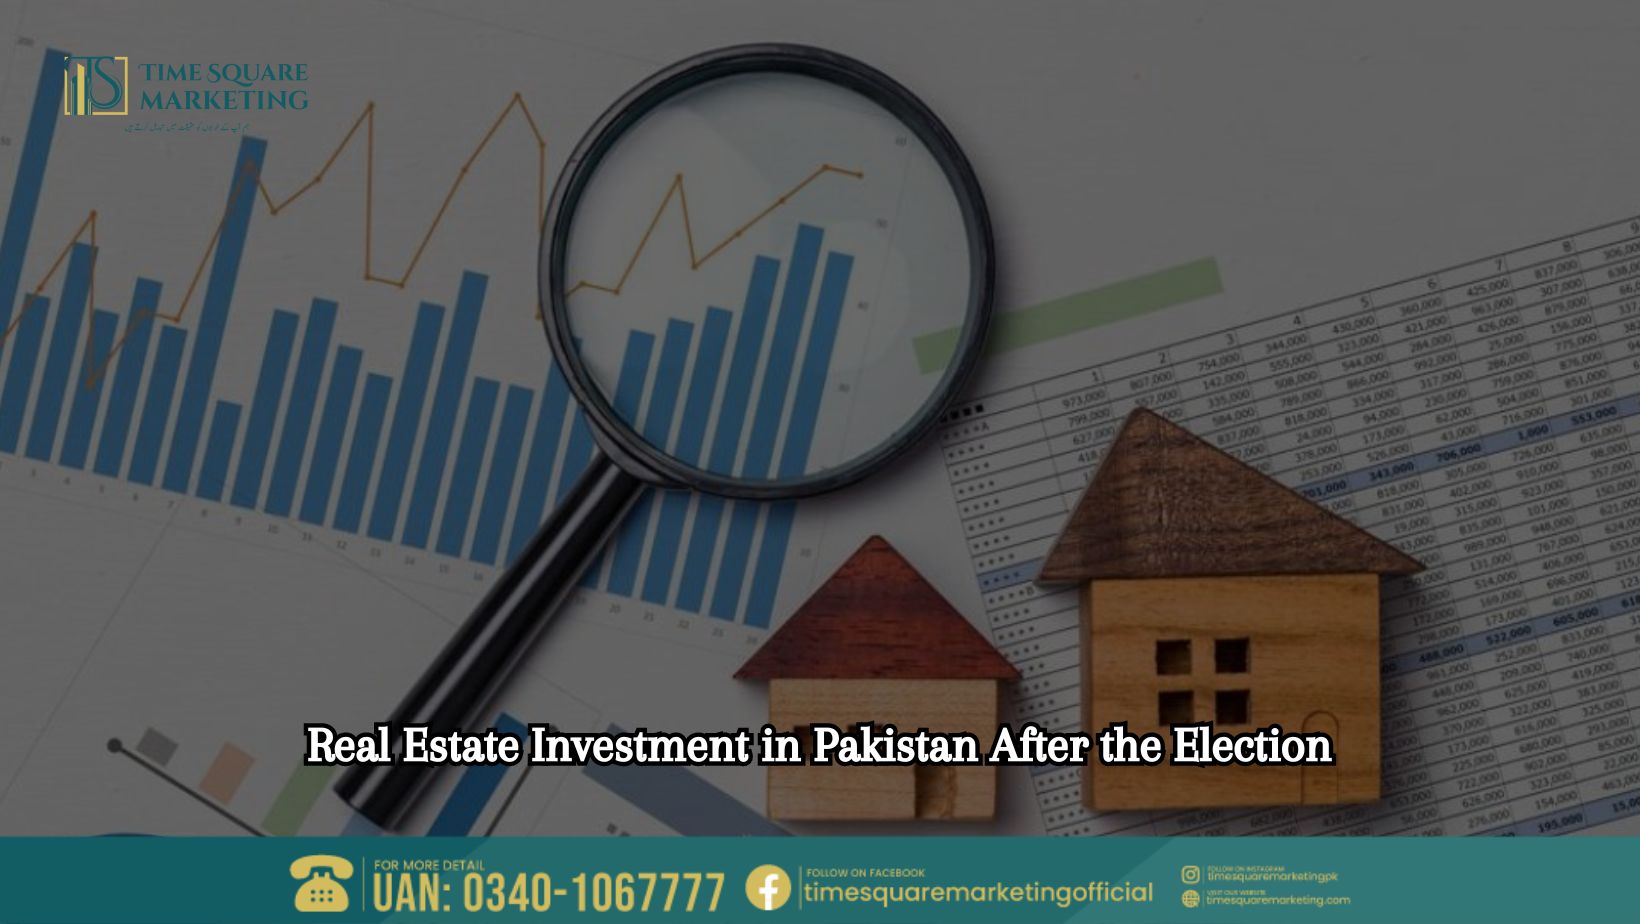 Real Estate Investment in Pakistan After the Election Opportunities and Challenges